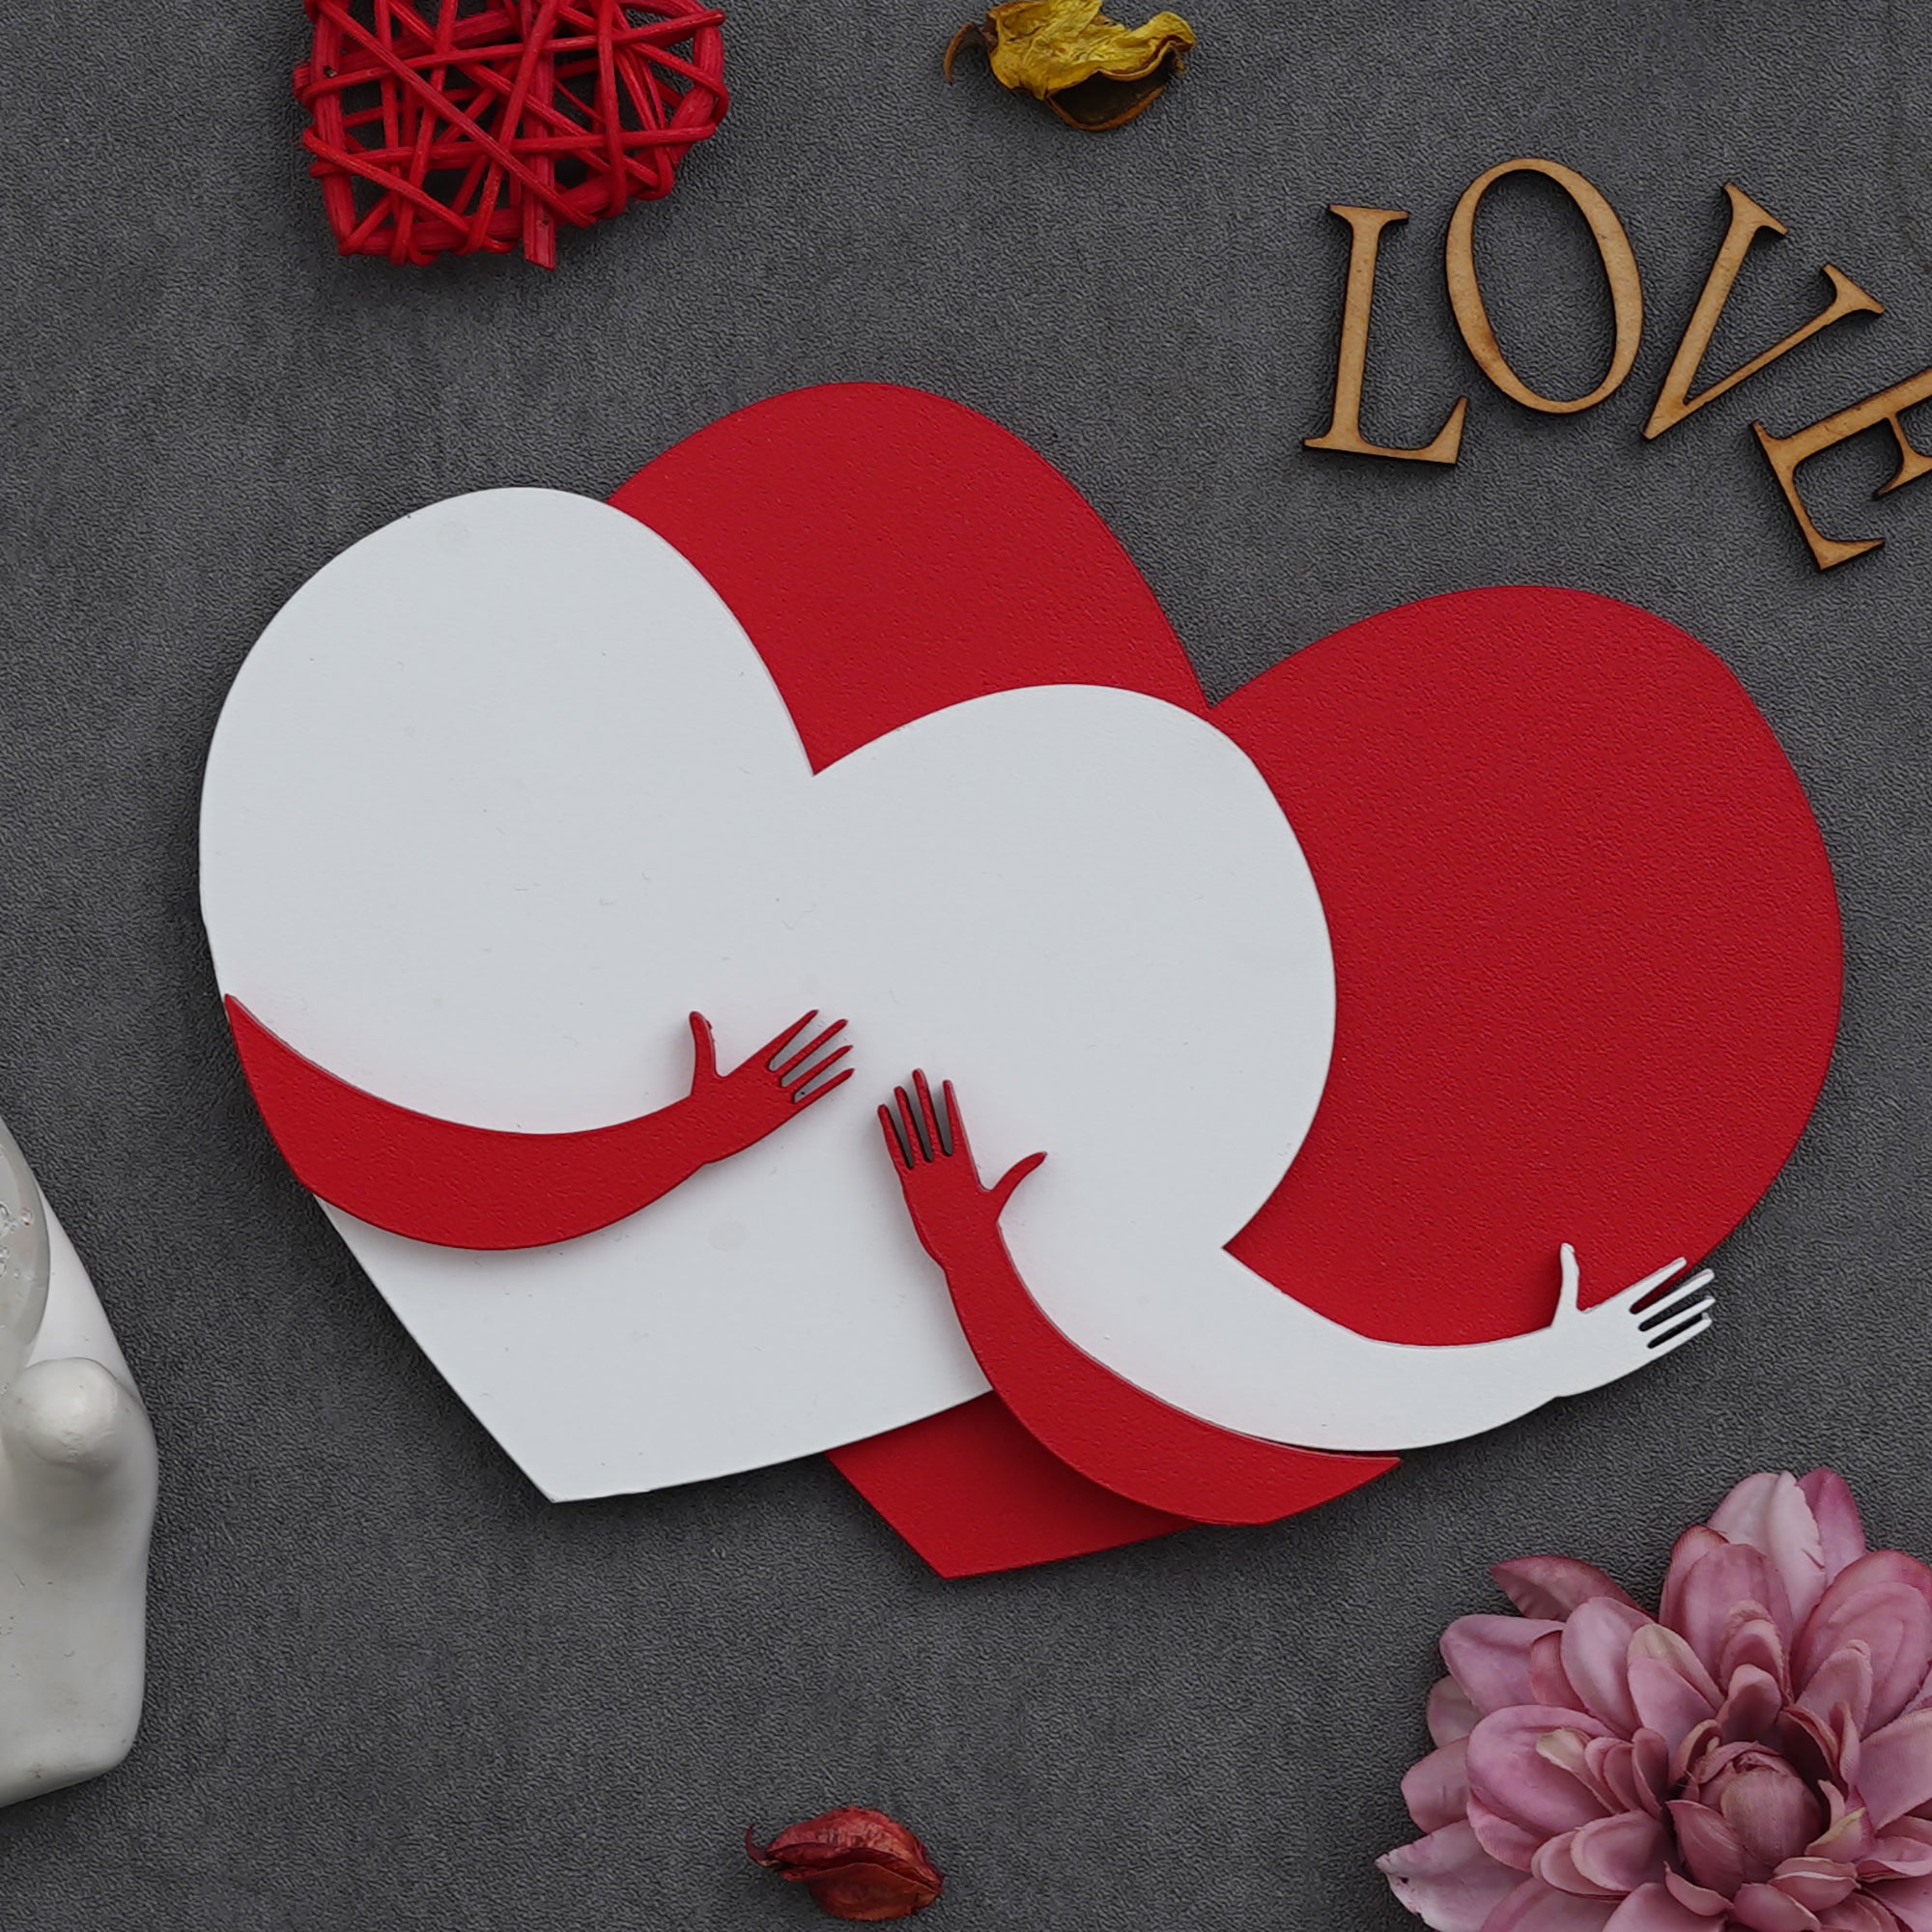 Valentine Combo of Pack of 8 Love Gift Cards, Red Gift Box with Teddy & Roses, Red and White Heart Hugging Each Other Gift Set 5